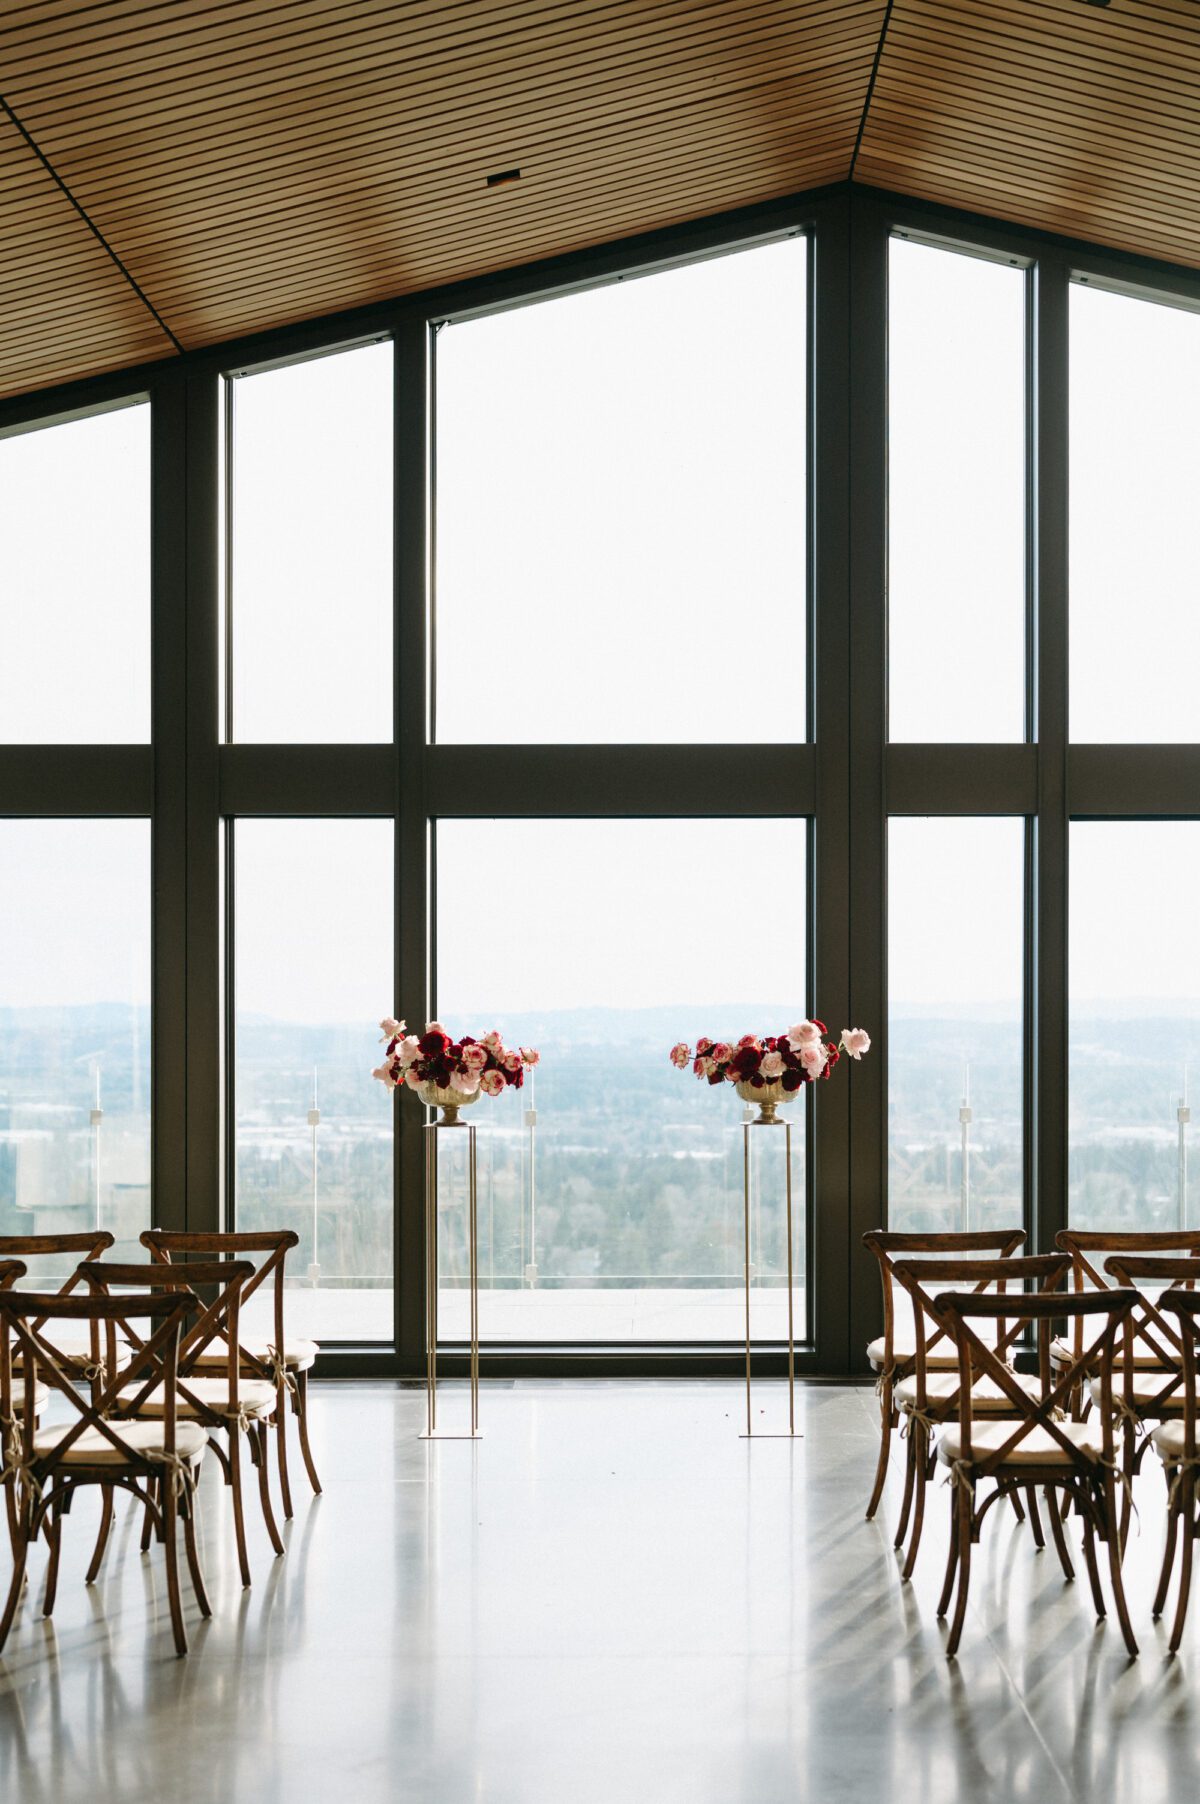 The Amaterra Wines indoor wedding venue Portland space with floor to ceiling windows overlooking the city of Portland, wood chairs set out for guests, and two stands flanking the ceremony site with large pink and red florals set on top.